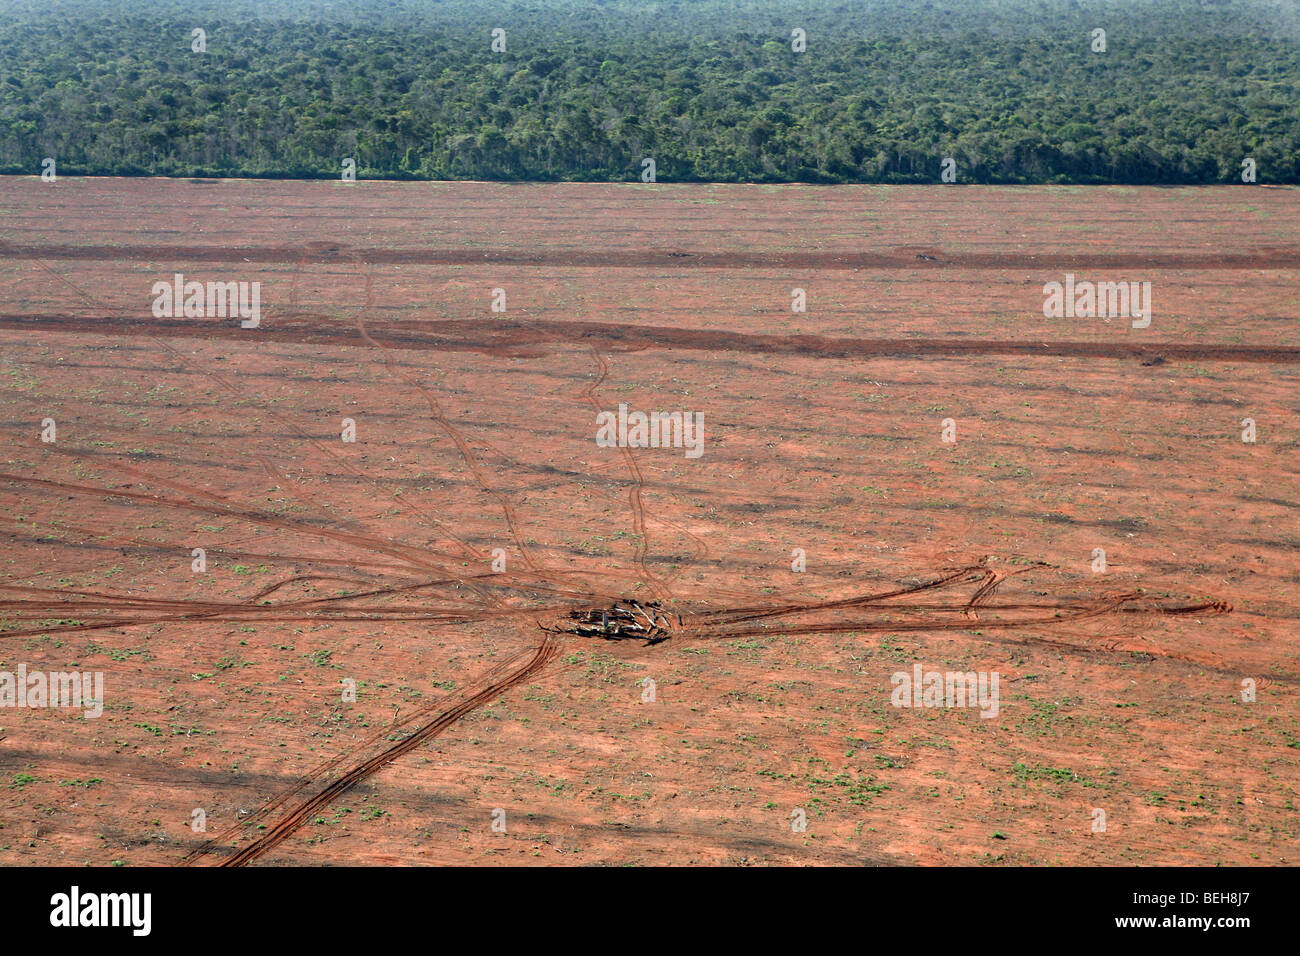 A lrage part of the Amazone has been destroyed and transferred into farmland. The main crops being cultivated are soya, grass fo Stock Photo